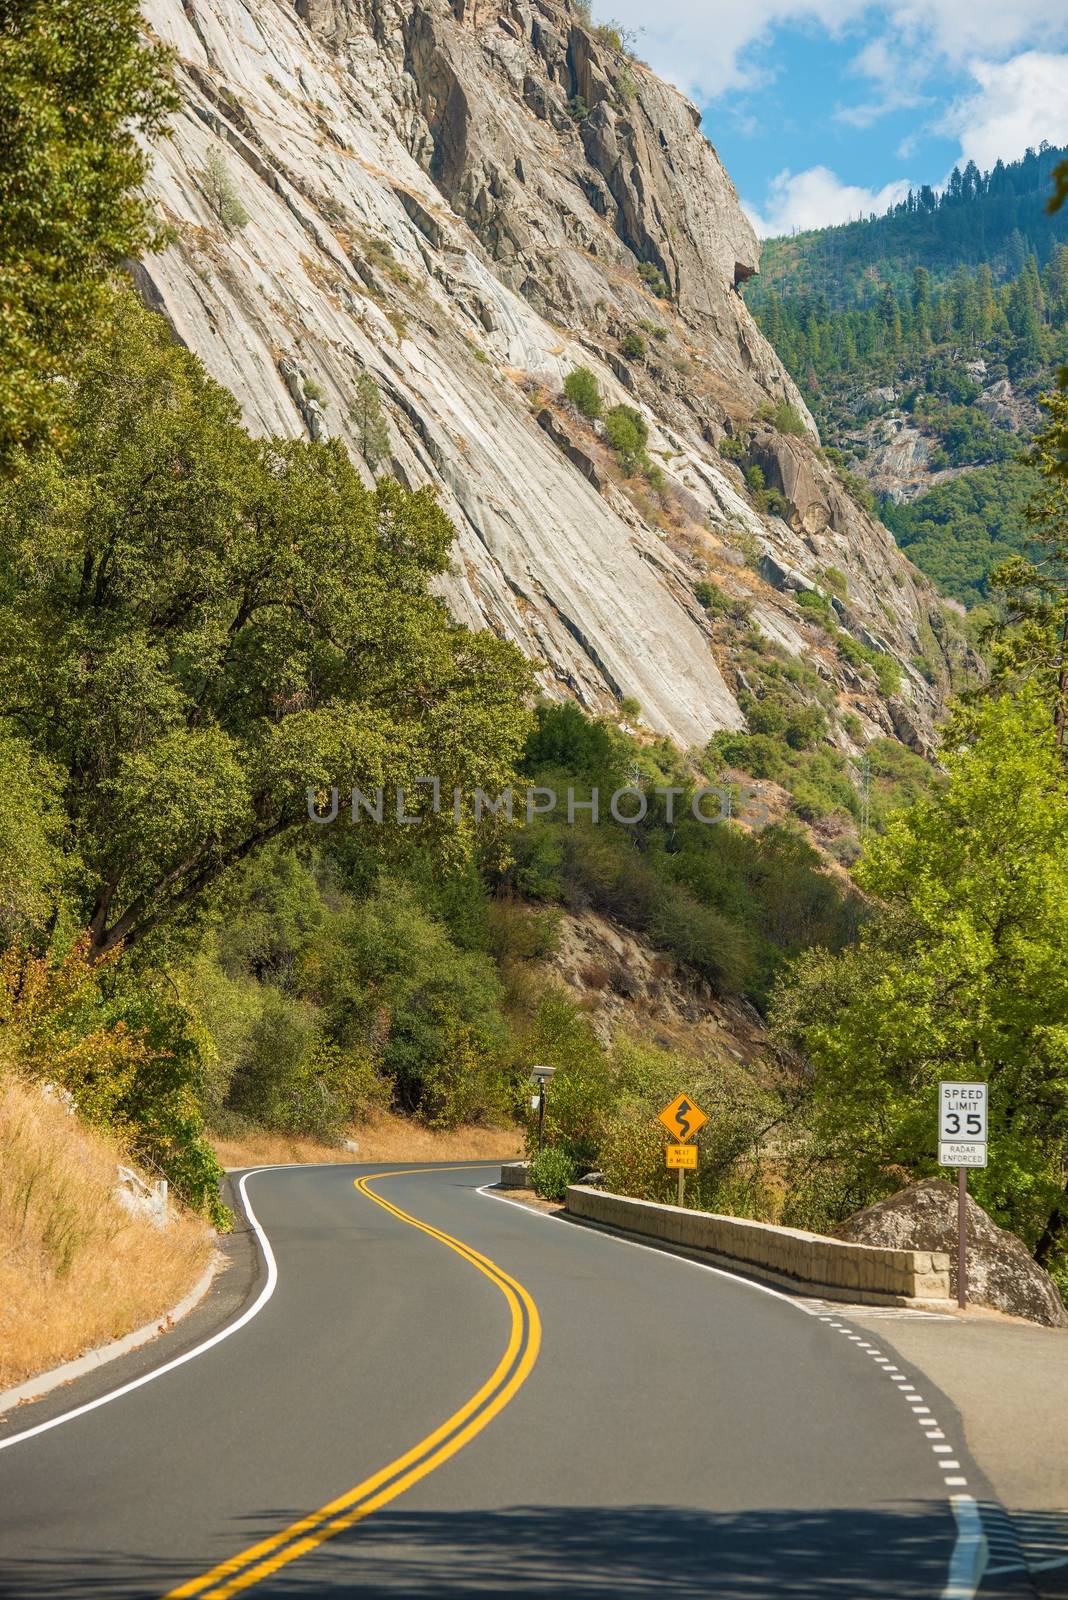 Yosemite Curved Road. Scenic by Way in Yosemite Sierra Nevada Mountains. California, United States.